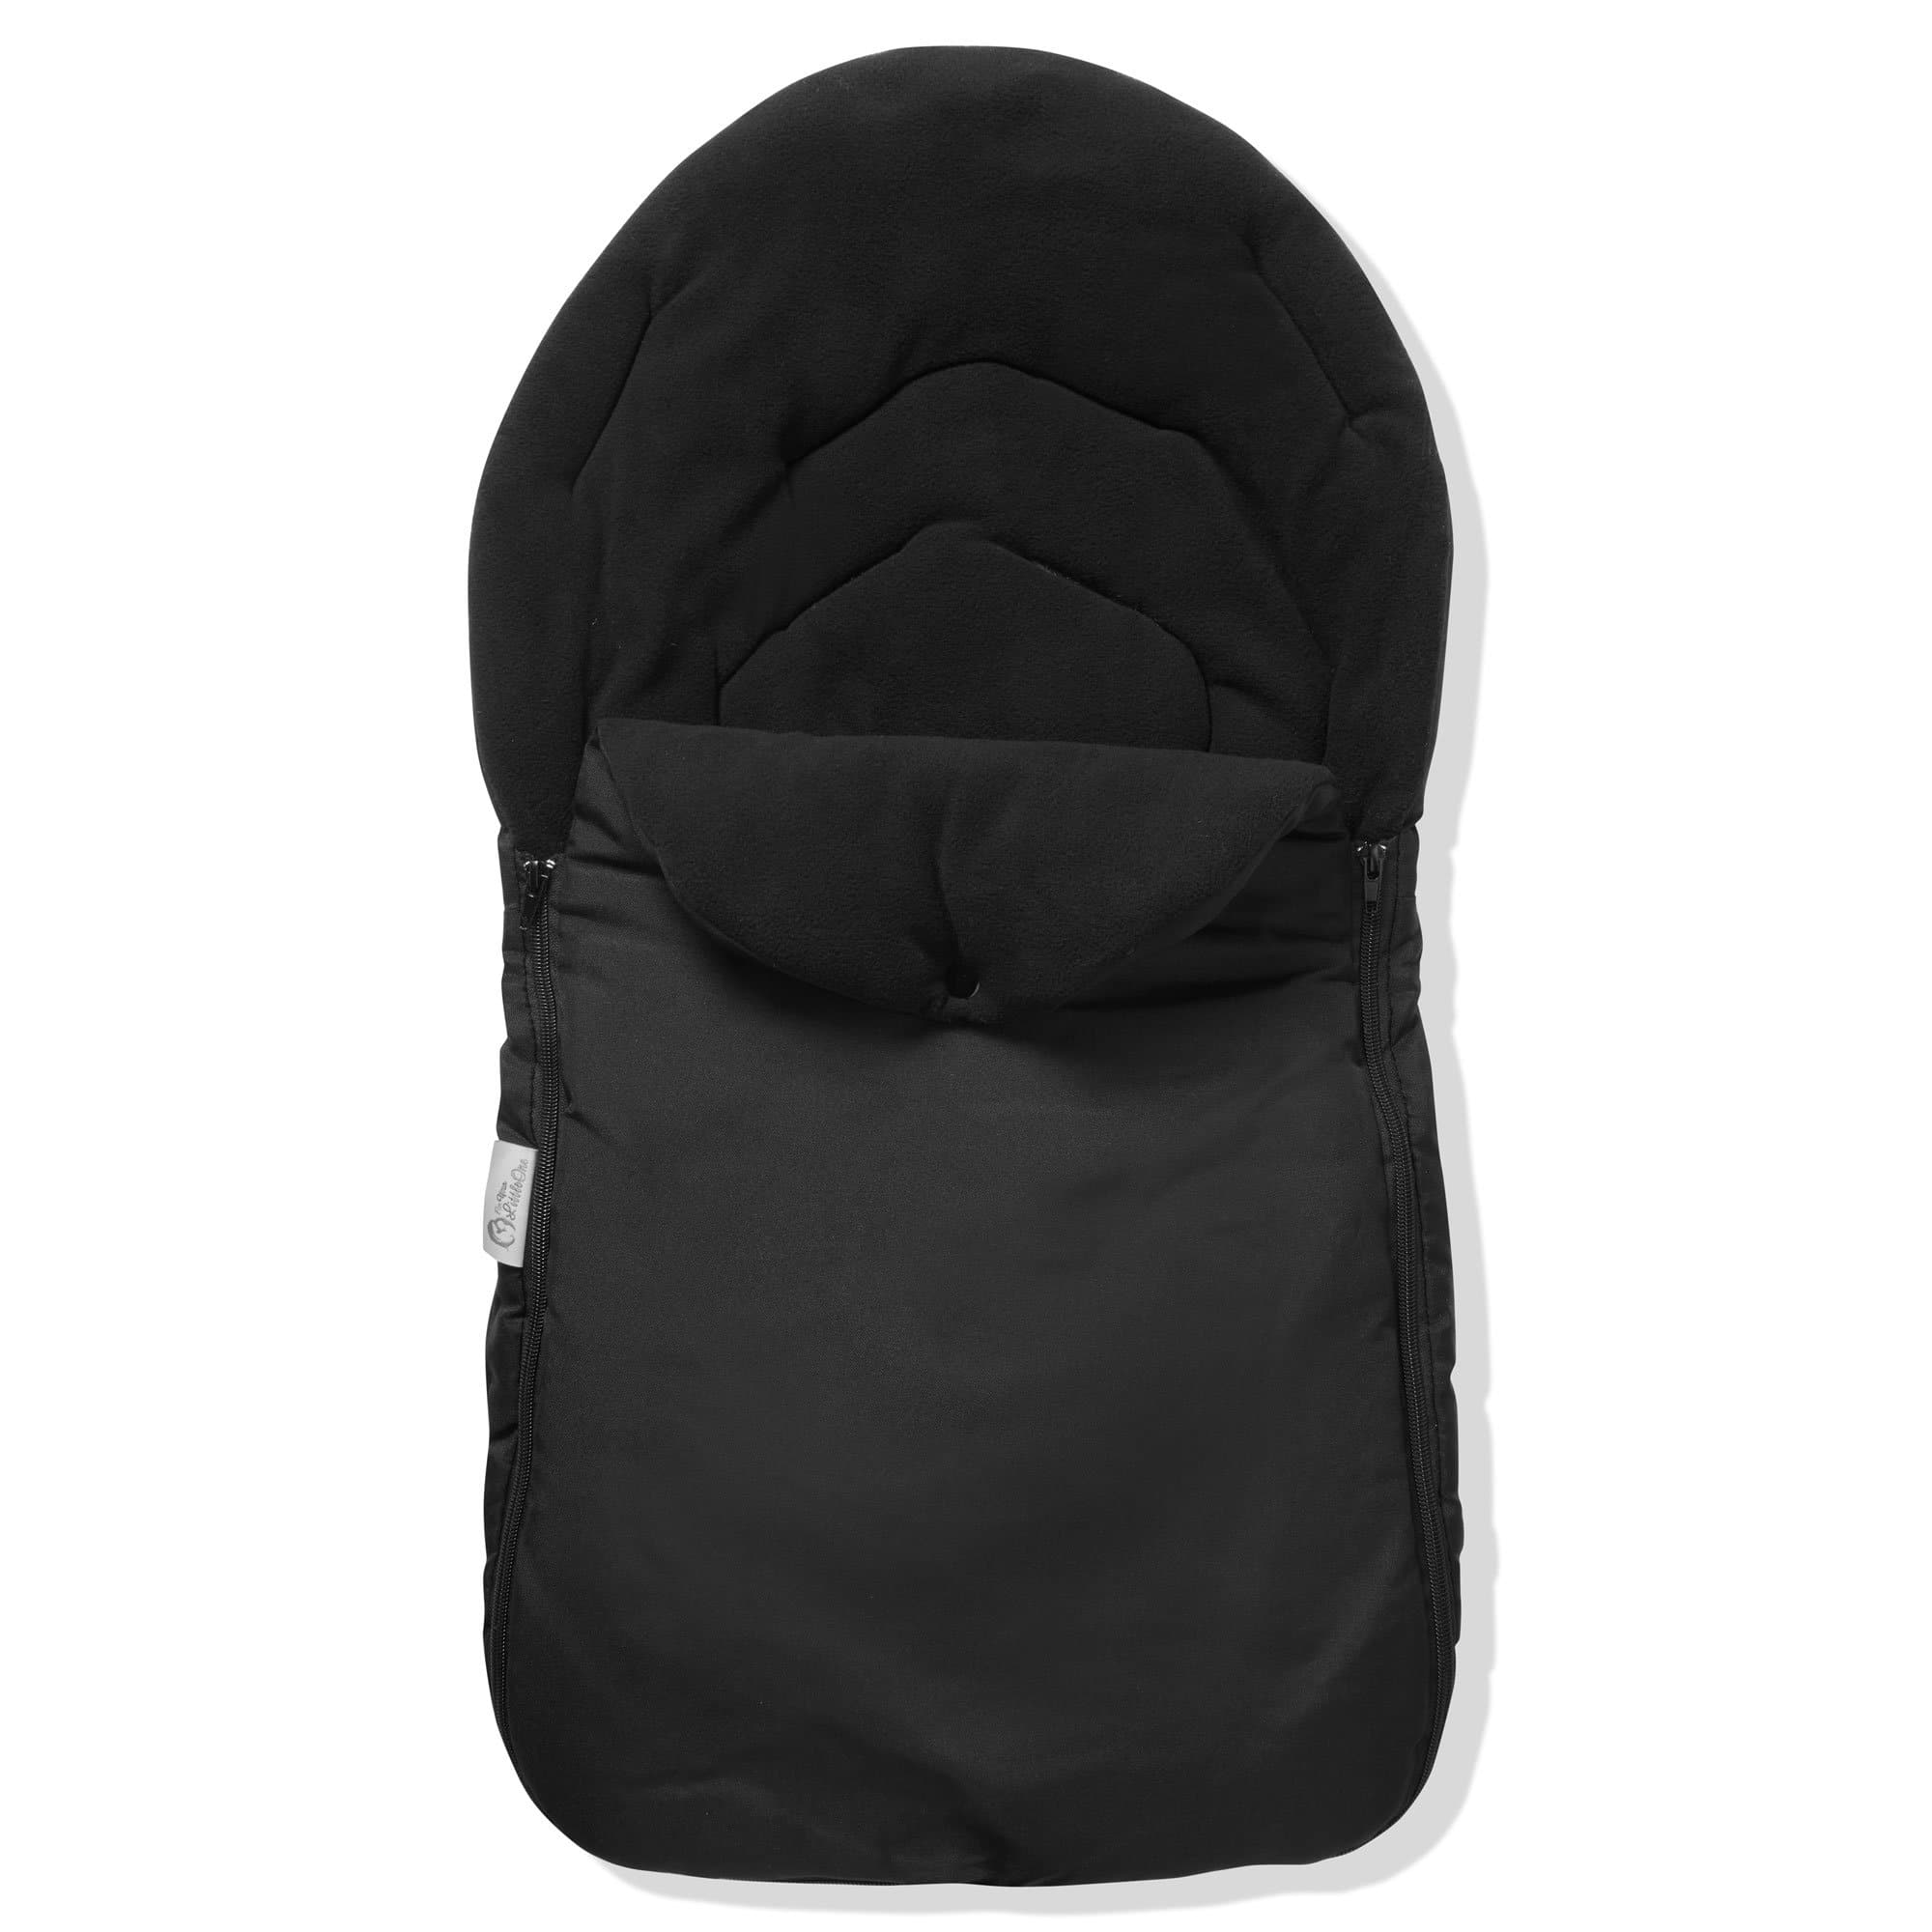 Universal Car Seat Footmuff / Cosy Toes - Fits All 3 And 5 Point Harnesses - Black | For Your Little One